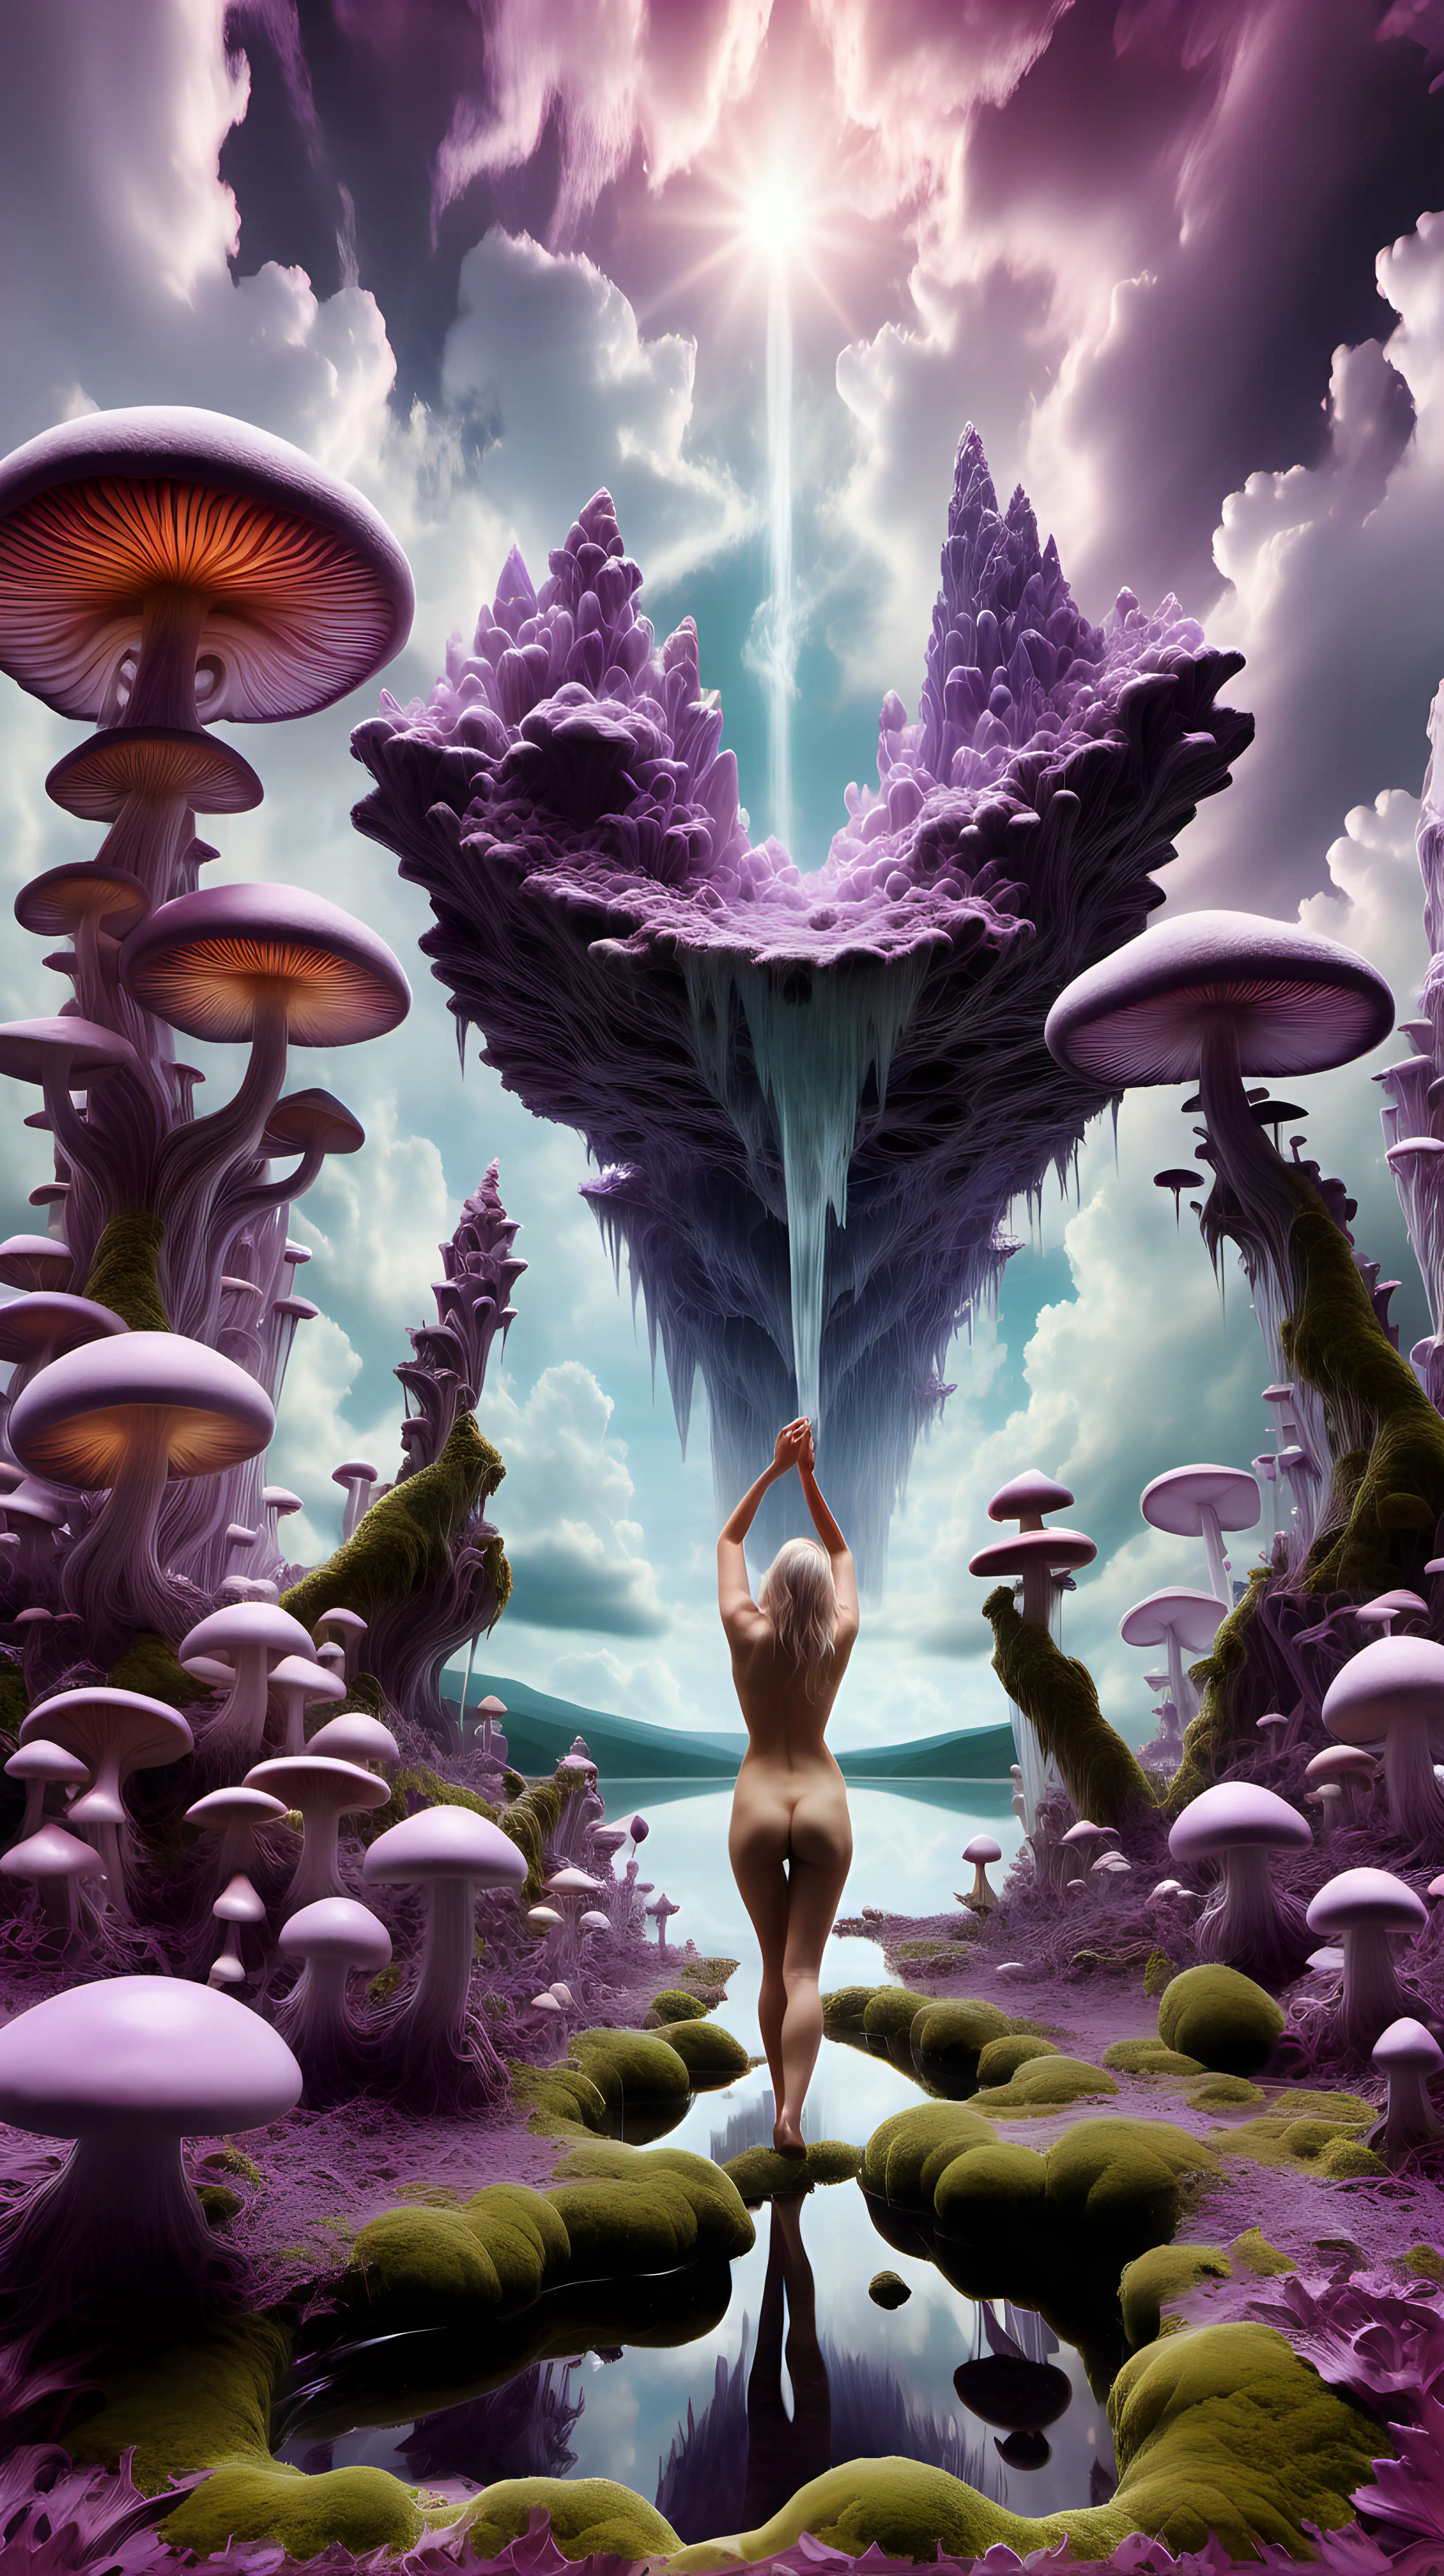 Psychedelic landscape, crystalline purplish mineral clouds, with nude woman ascending up into the sky, Moss, mushrooms, and water on the ground